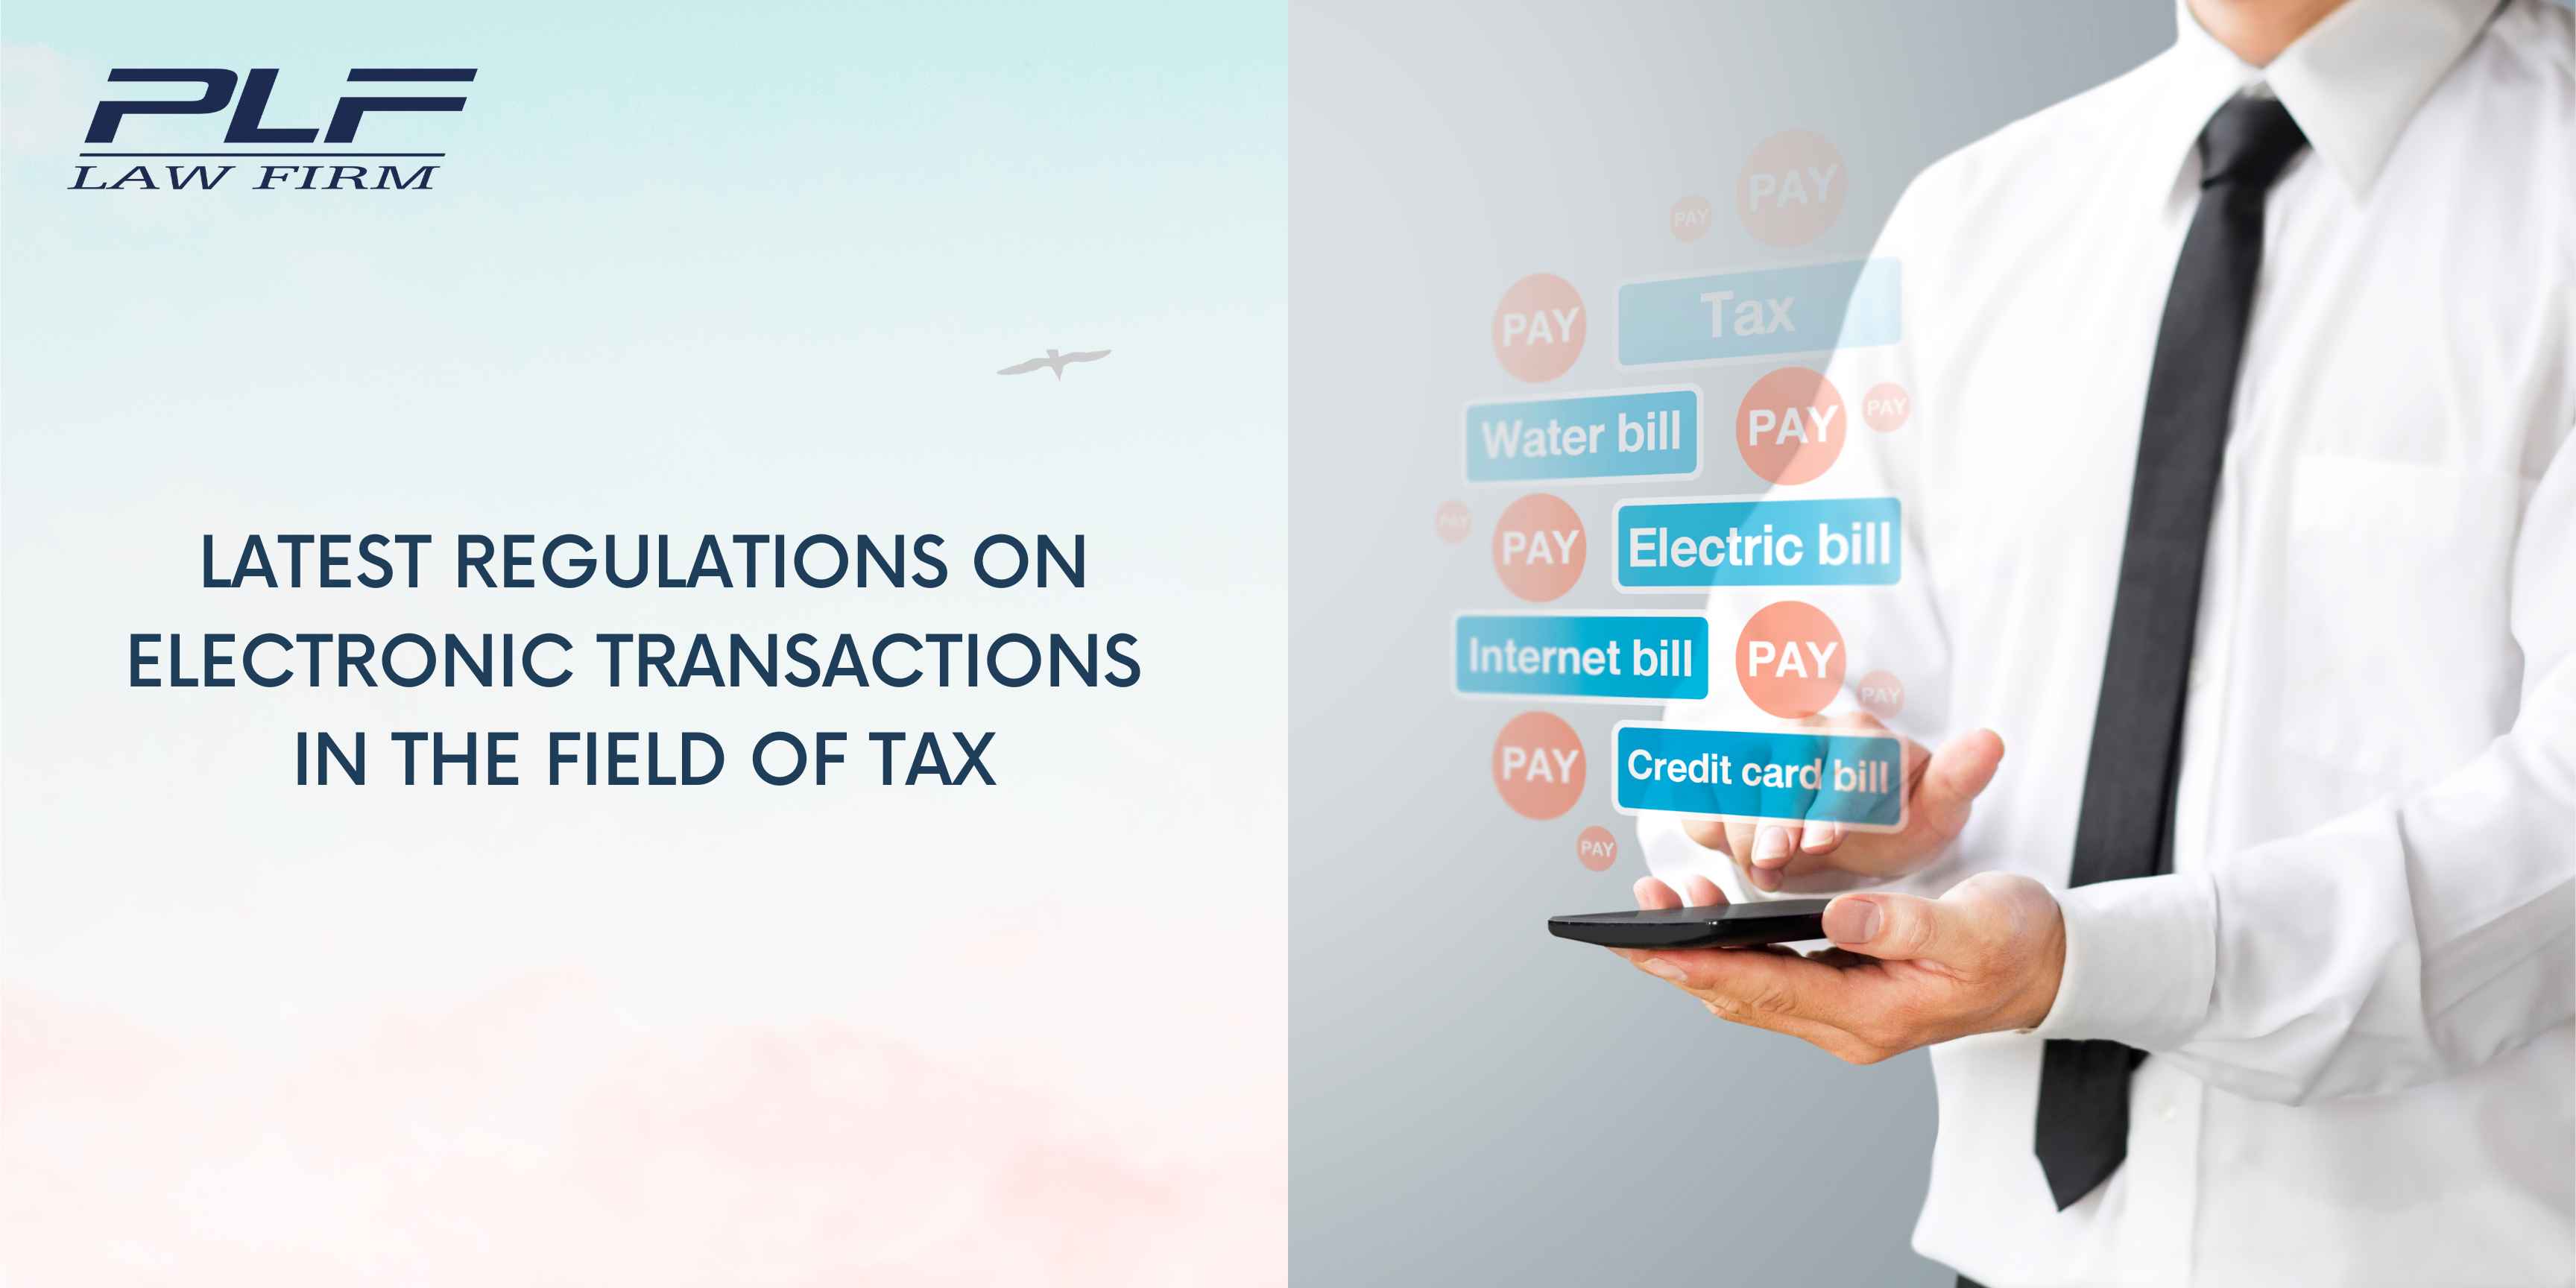 Plf Latest Regulations On Electronic Transactions In The Field Of Tax